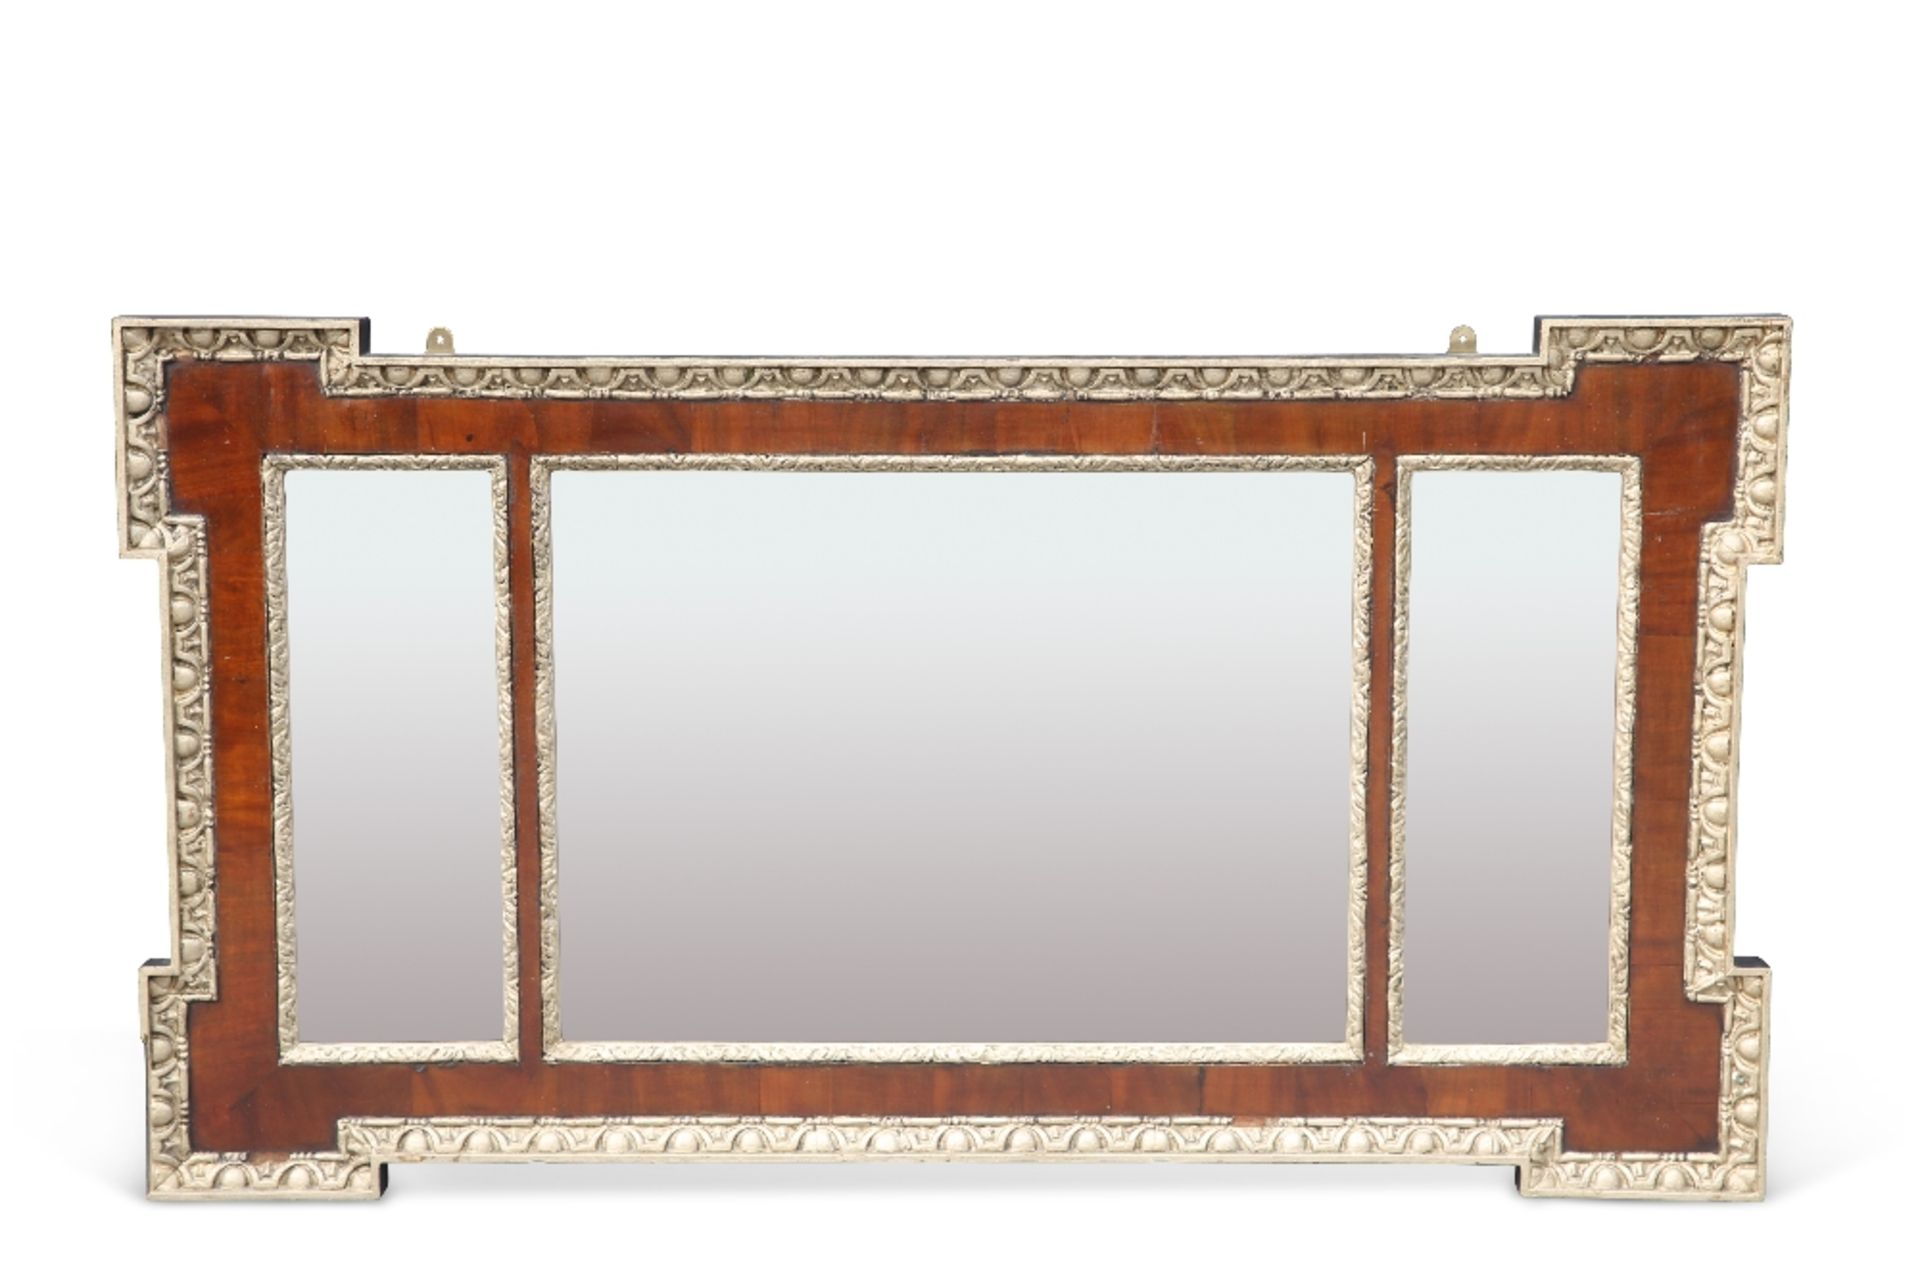 A 19TH CENTURY PARCEL-GILT MAHOGANY MIRROR, the rectangular frame with everted corners, housing